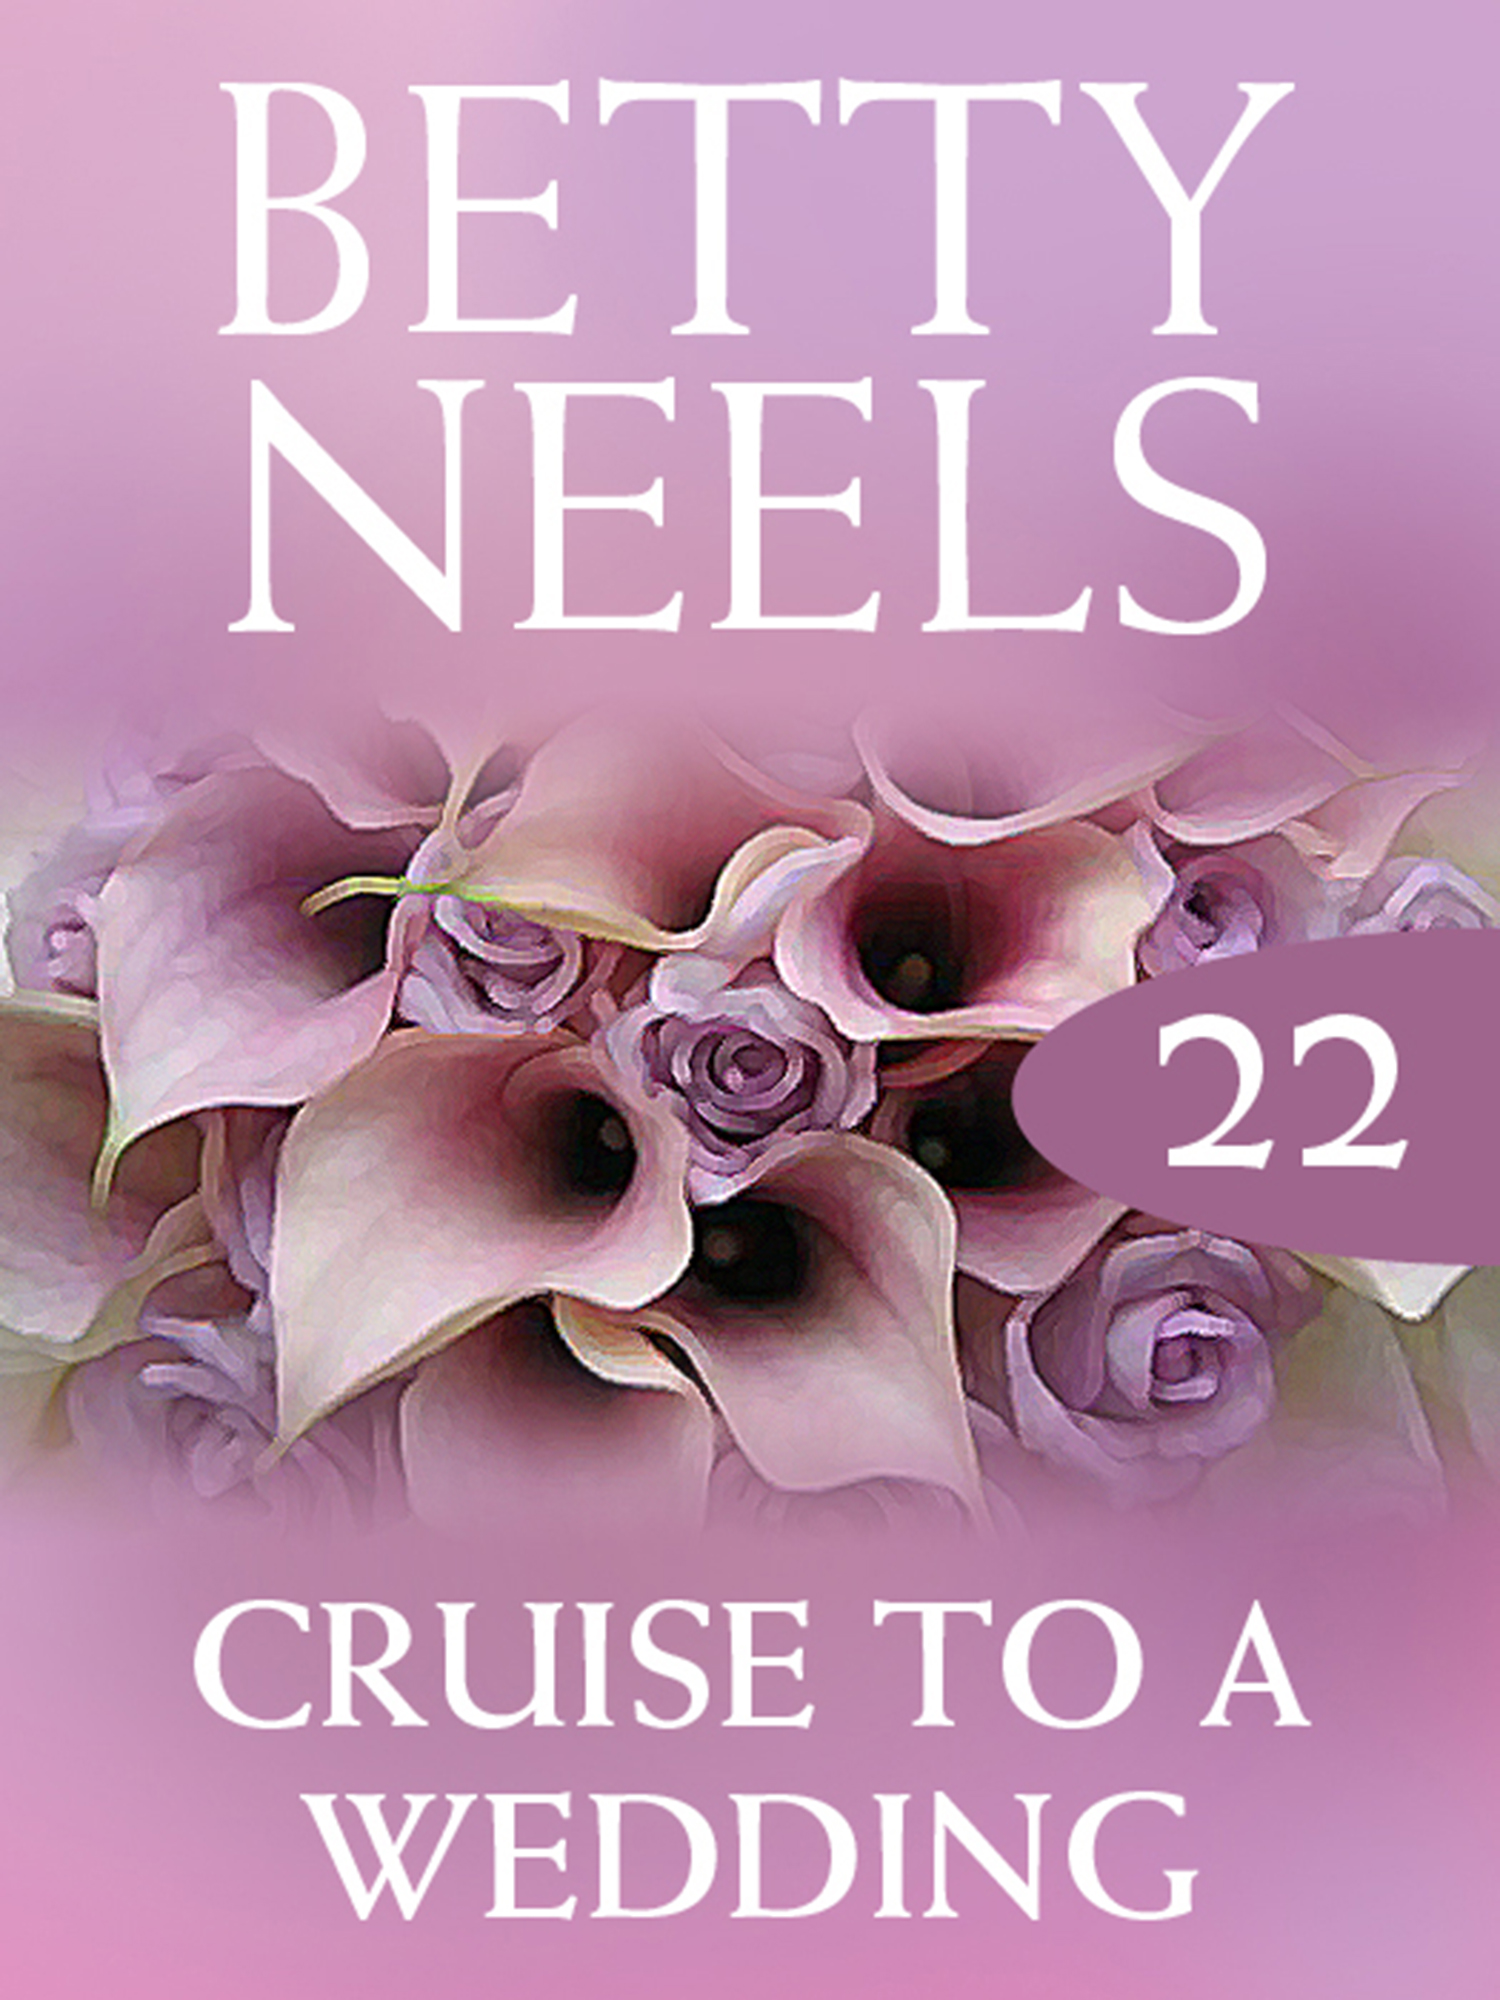 Cruise to a Wedding – Betty Neels, HarperCollins Publishers